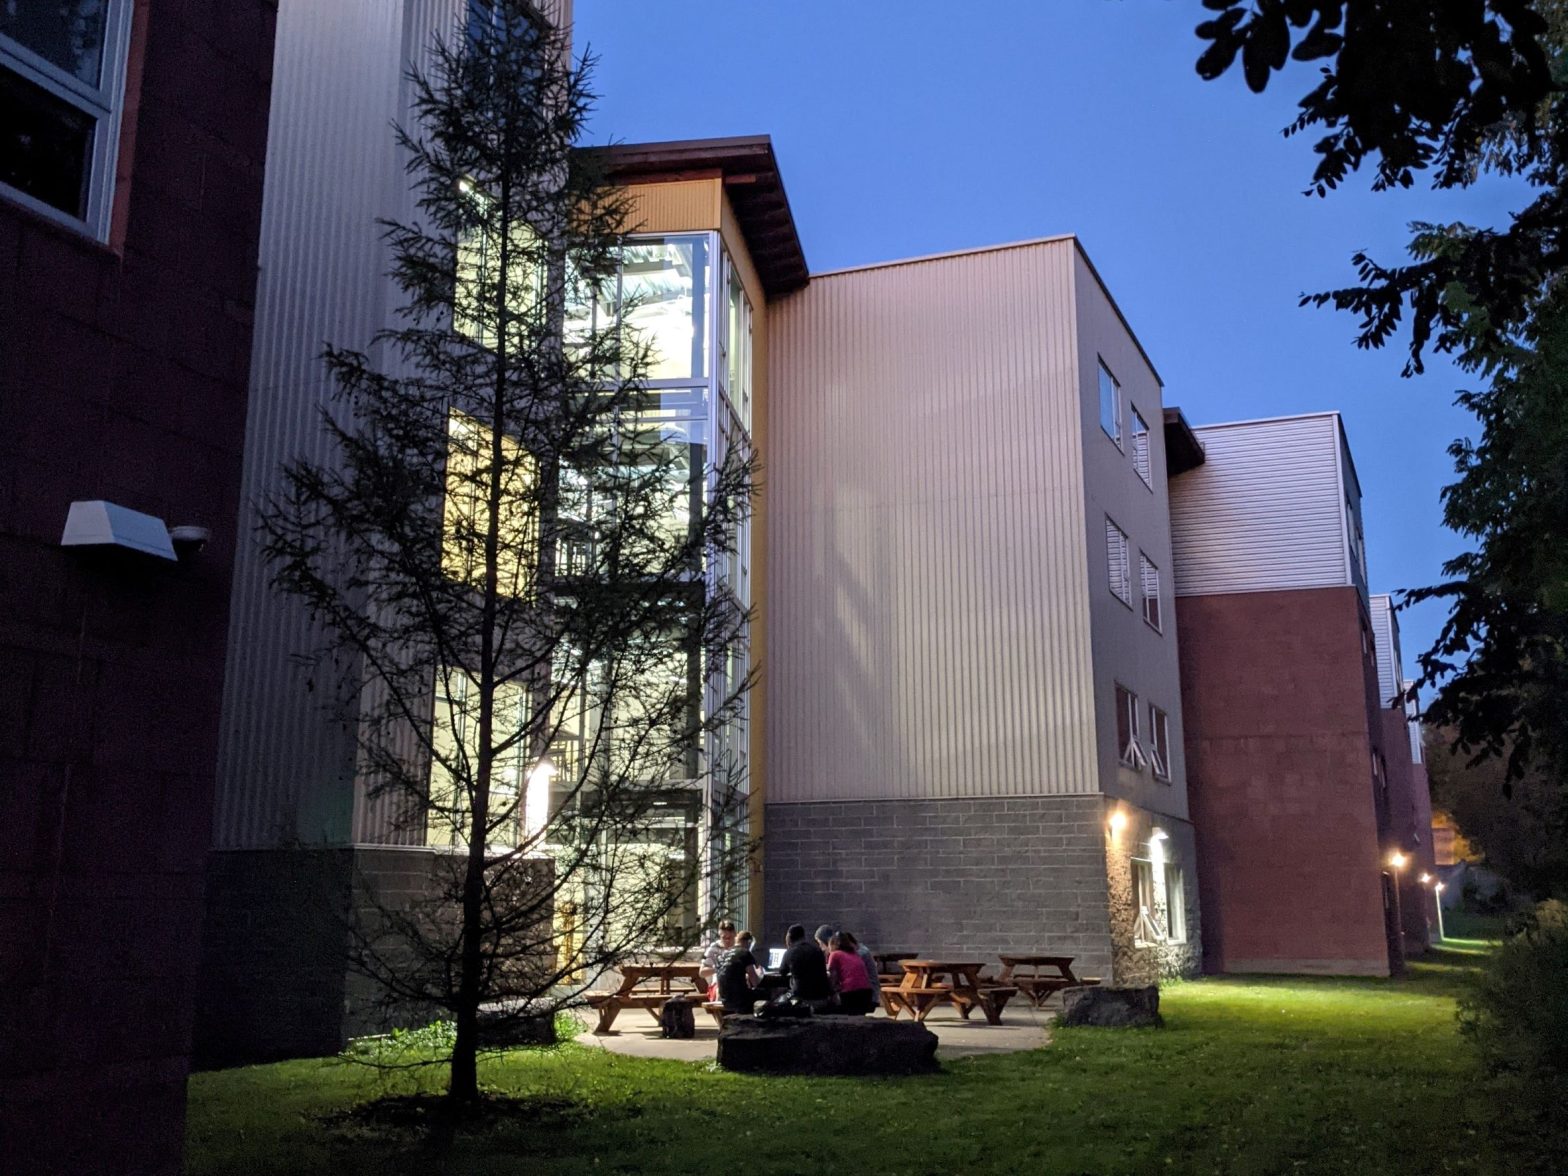 Several students studying on a picnic table next to a boulder and pine tree, against the backdrop of a contemporary gray steel building with a bright yellow and glass tower exuding light at dusk outside of dormitory / residence hall